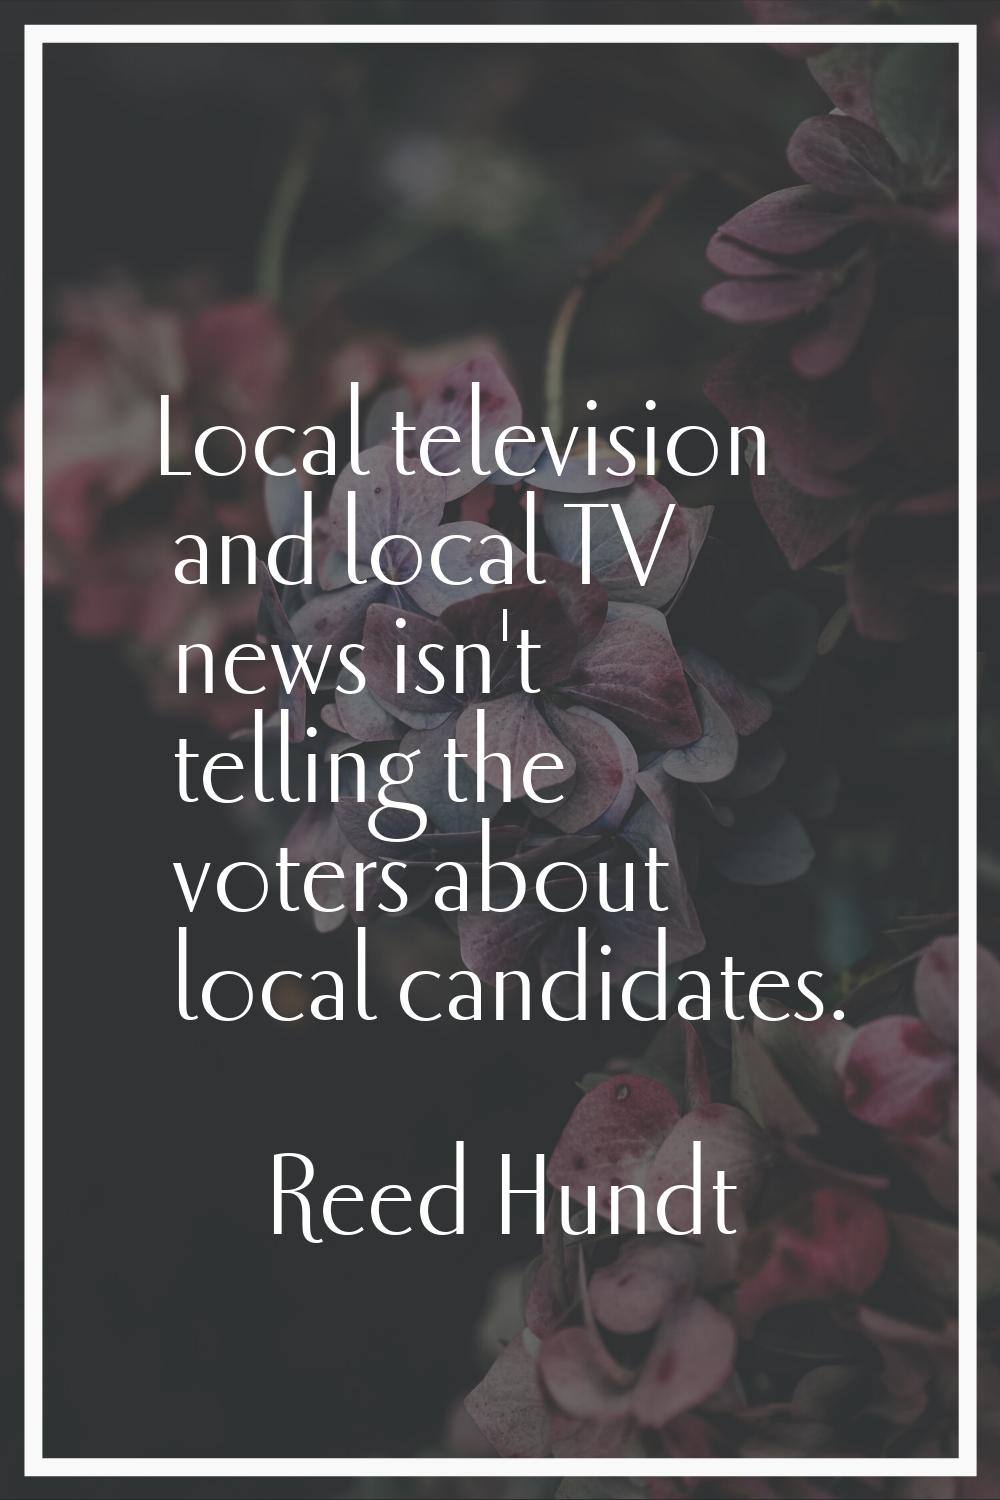 Local television and local TV news isn't telling the voters about local candidates.